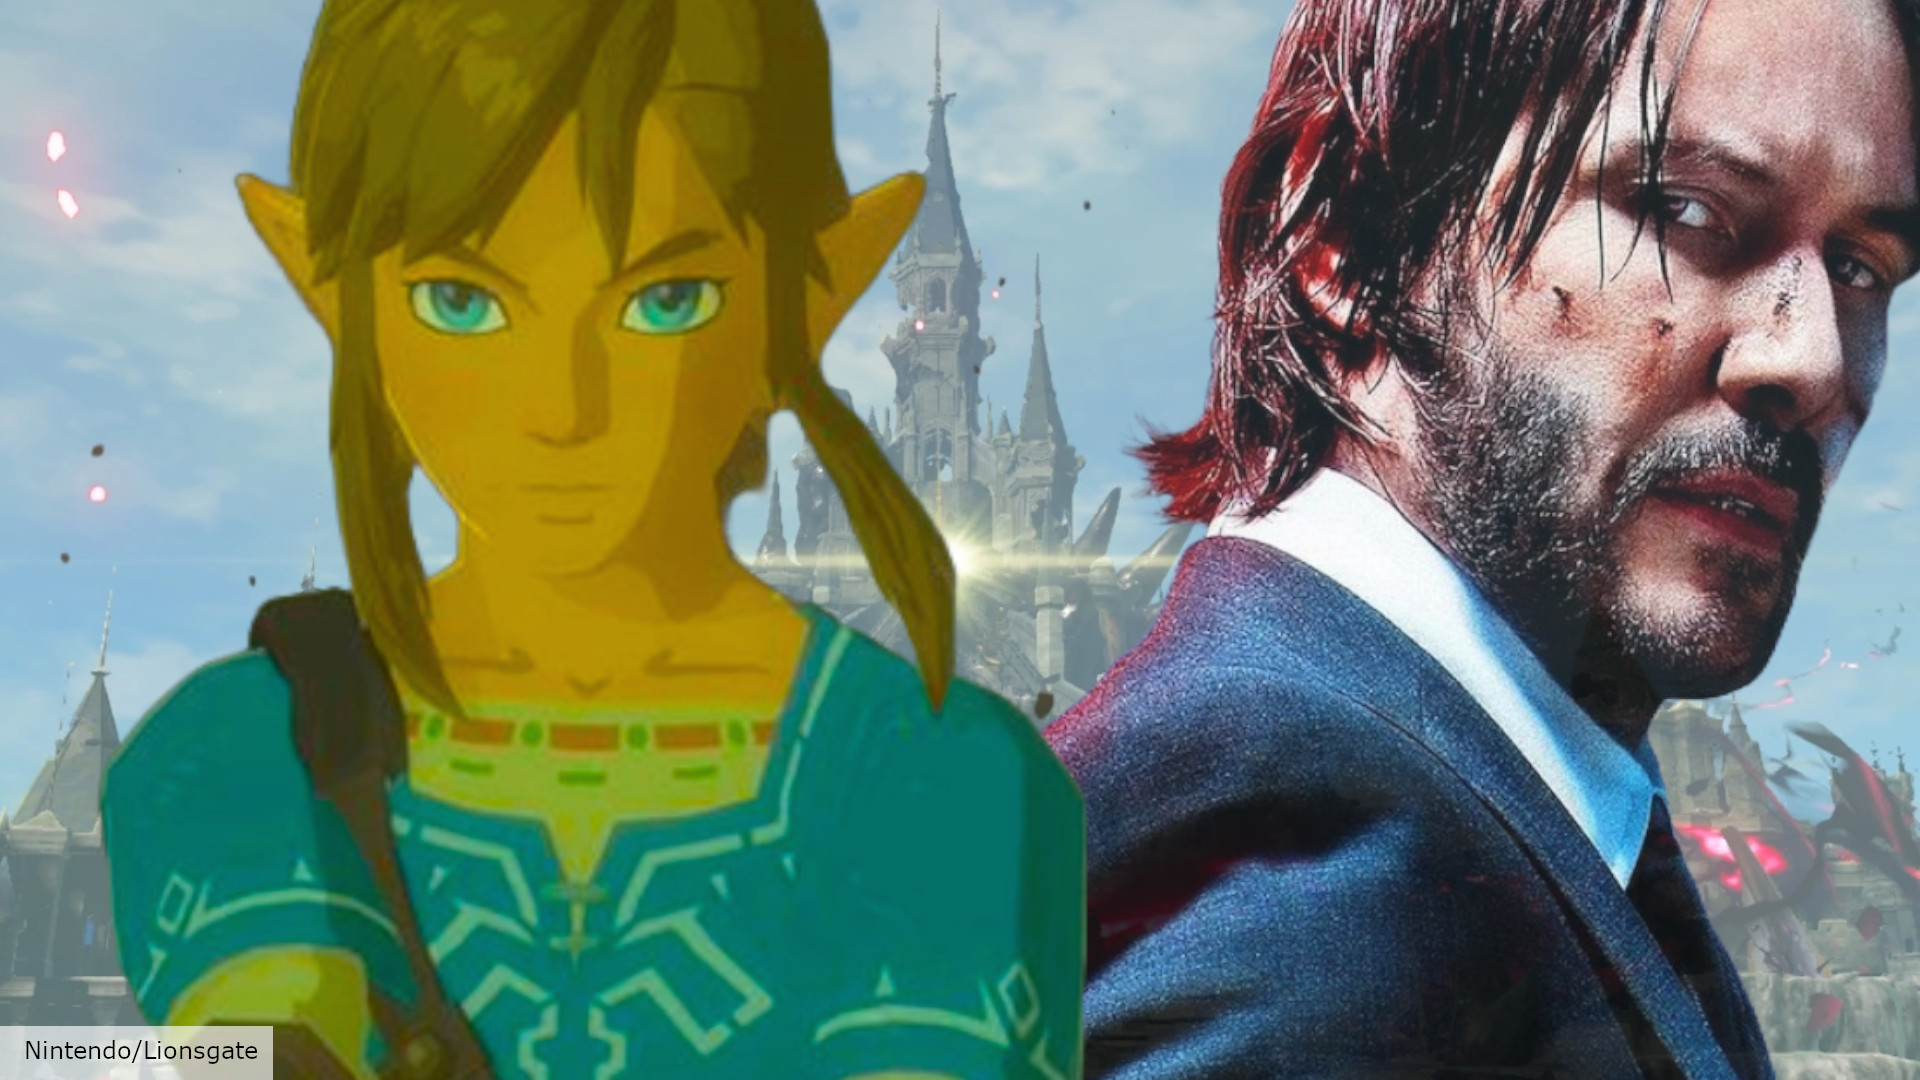 Live-Action Legend of Zelda Movie Won't Be Like Lord of the Rings